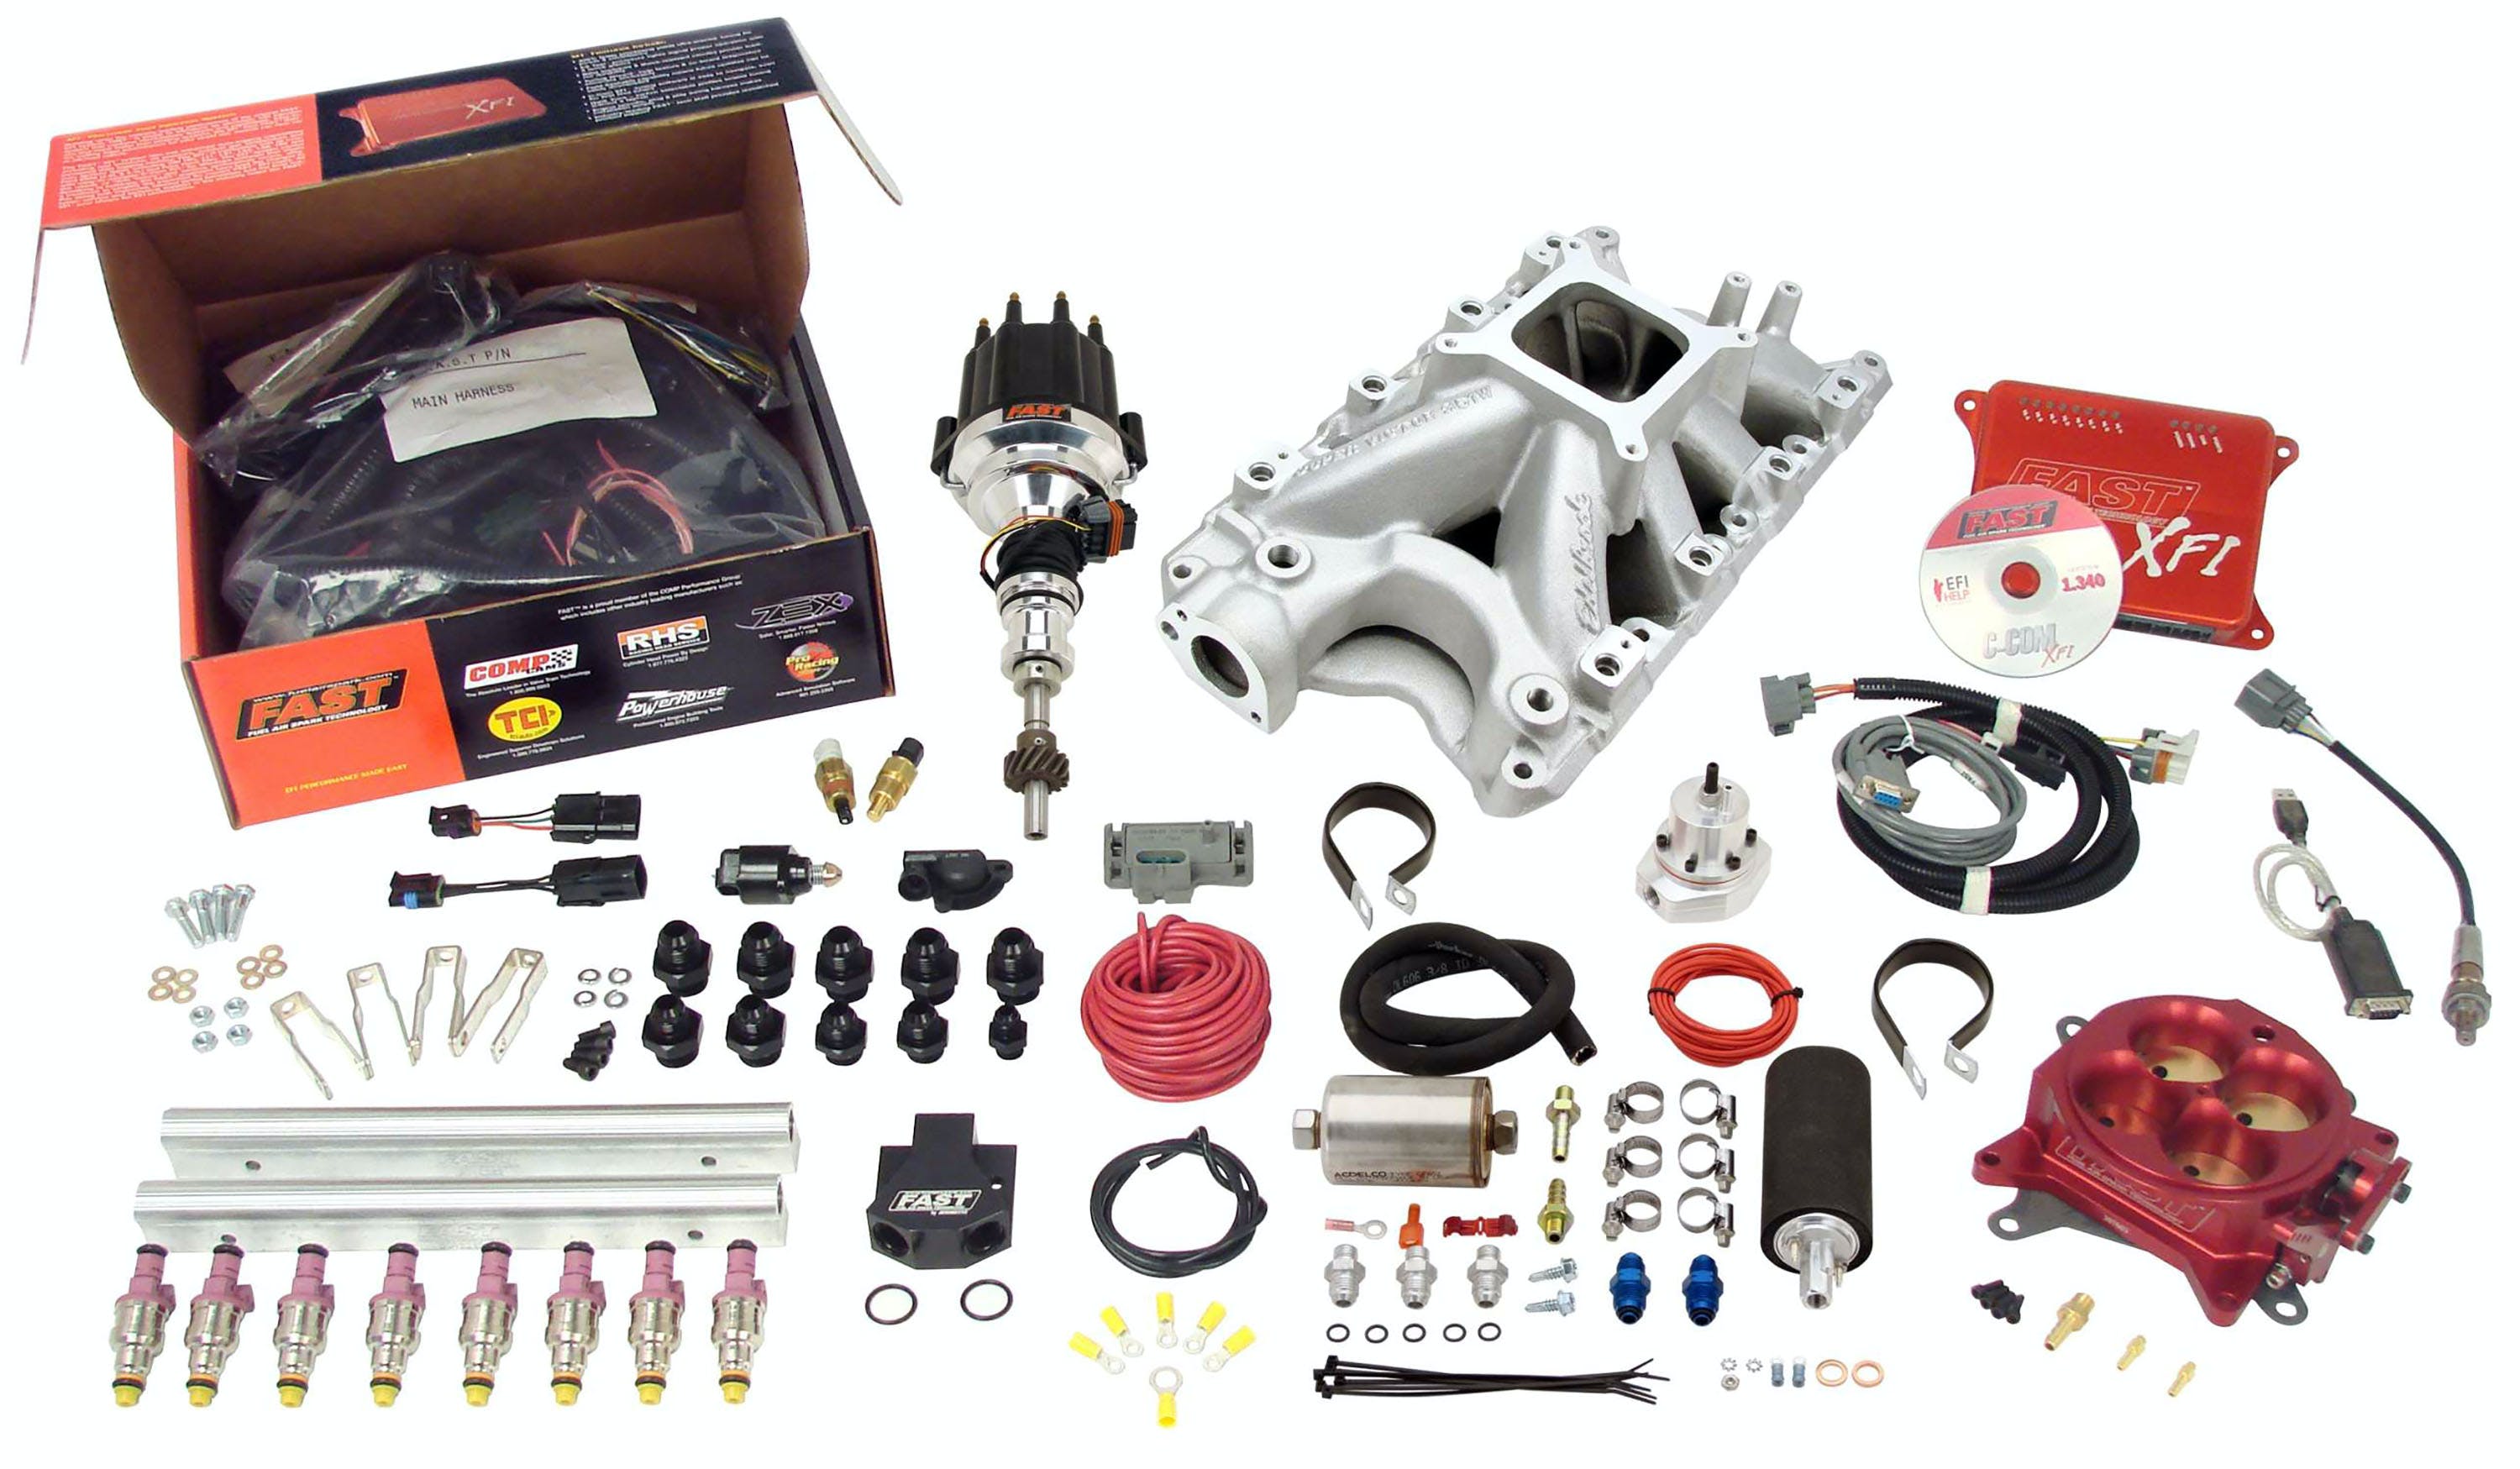 FAST - Fuel Air Spark Technology 3035351-05 XFI Windsor Kit with 500HP Pump